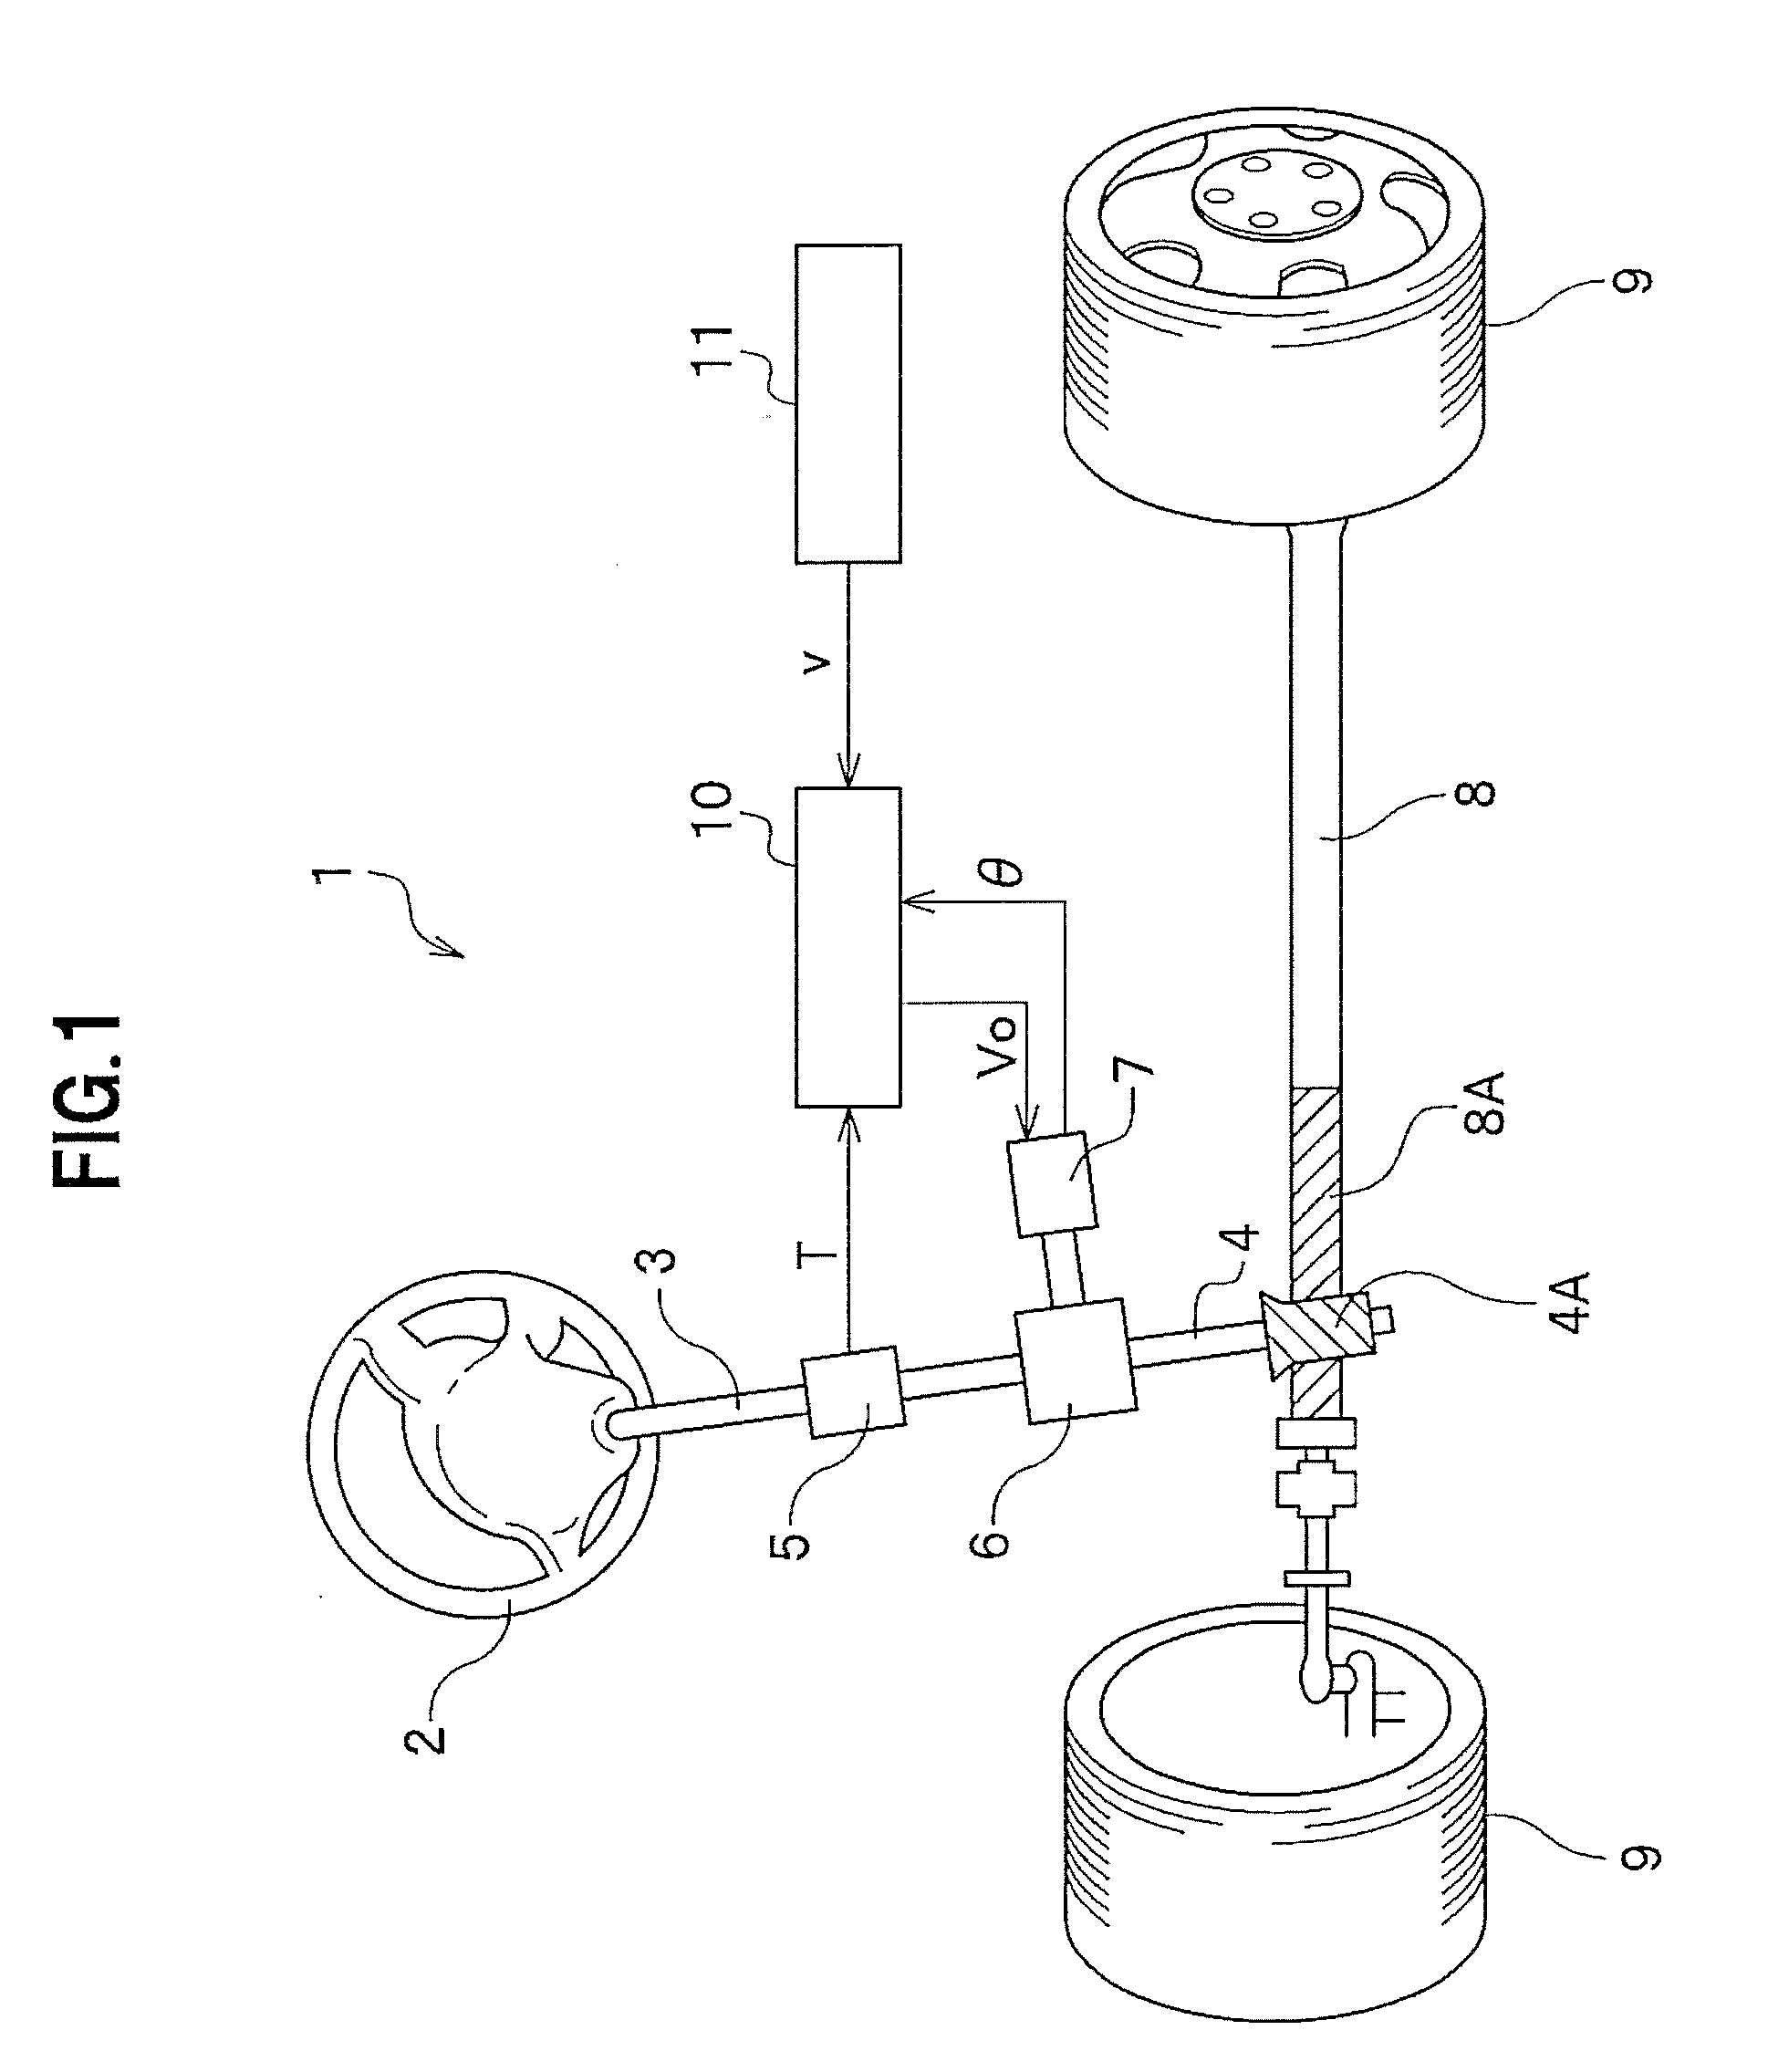 Electric power steering device